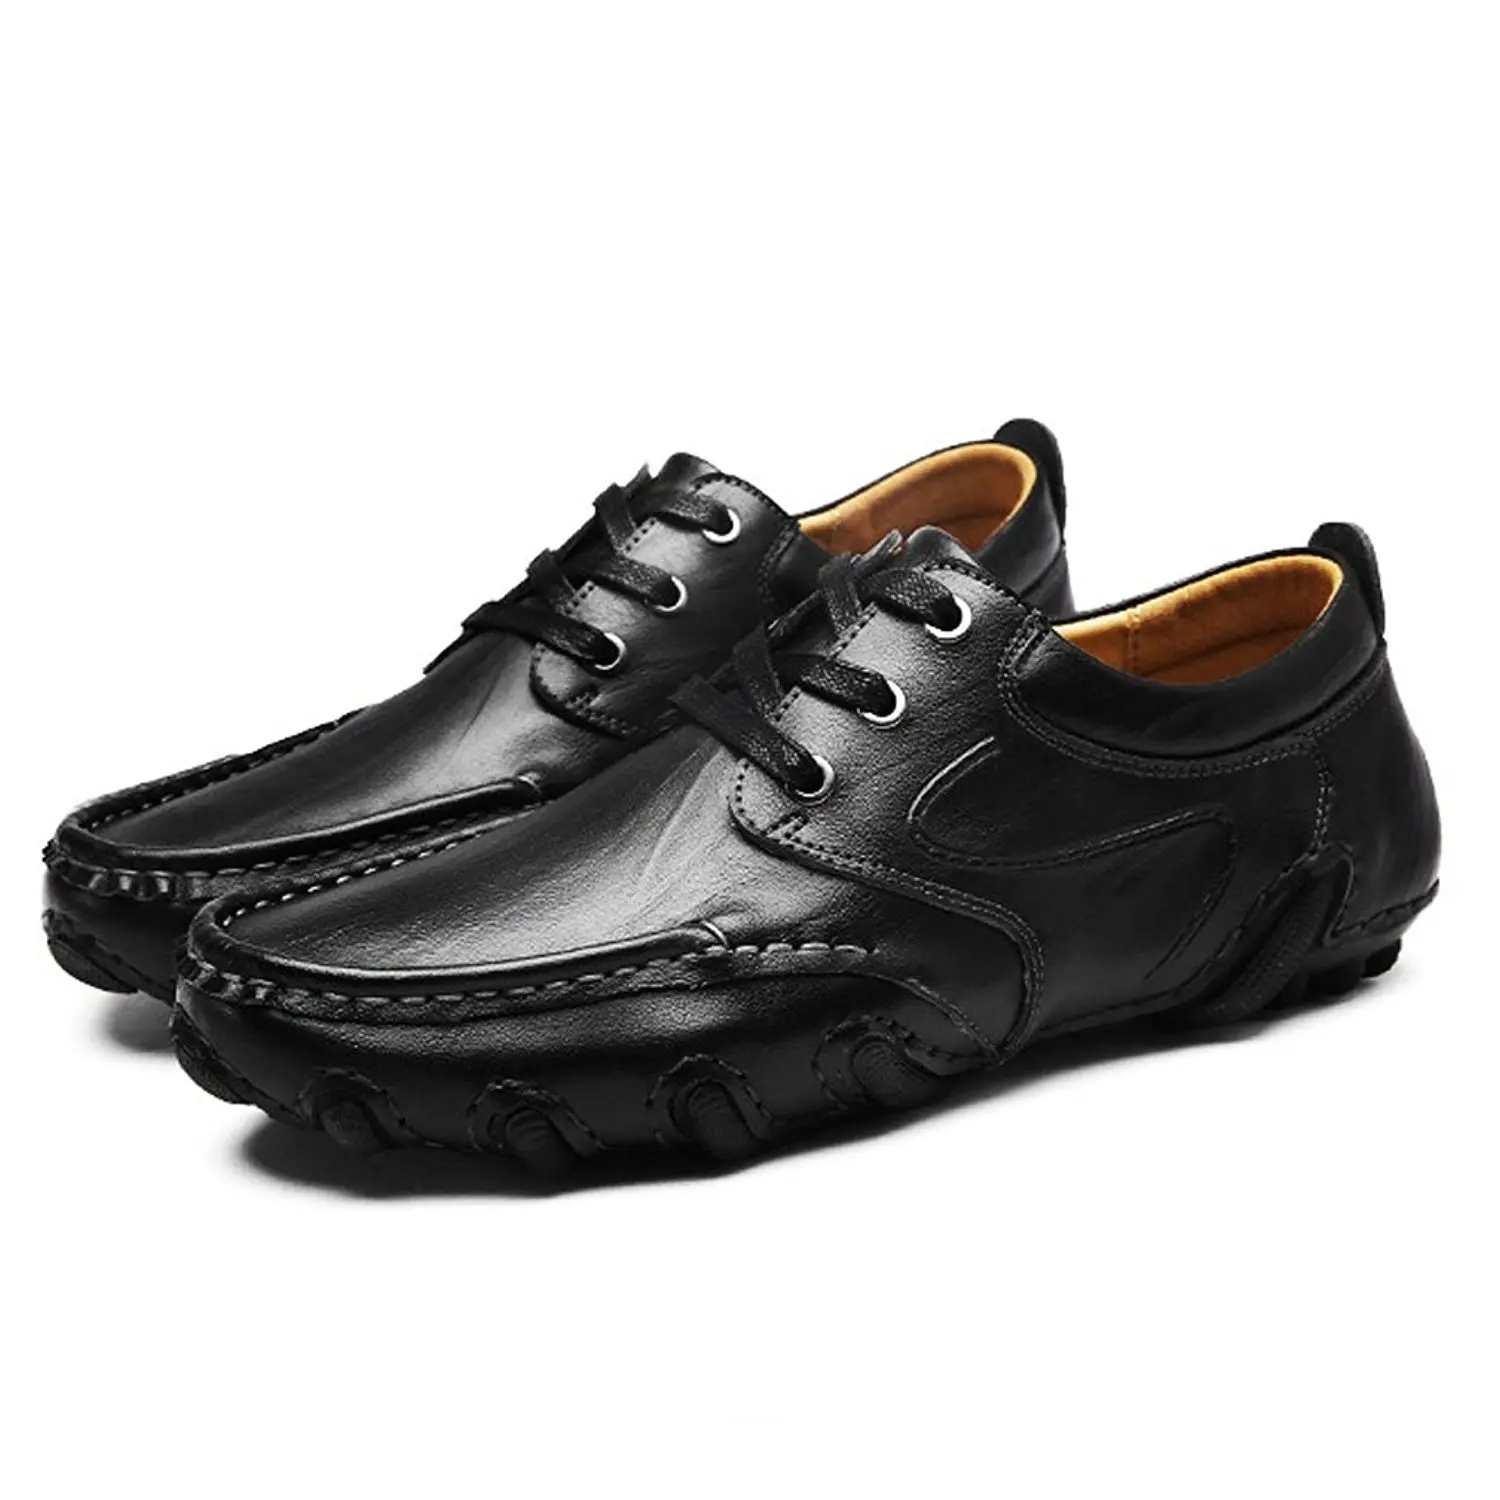 Cheap Mens Mules Shoes, find Mens Mules Shoes deals on line at Alibaba.com